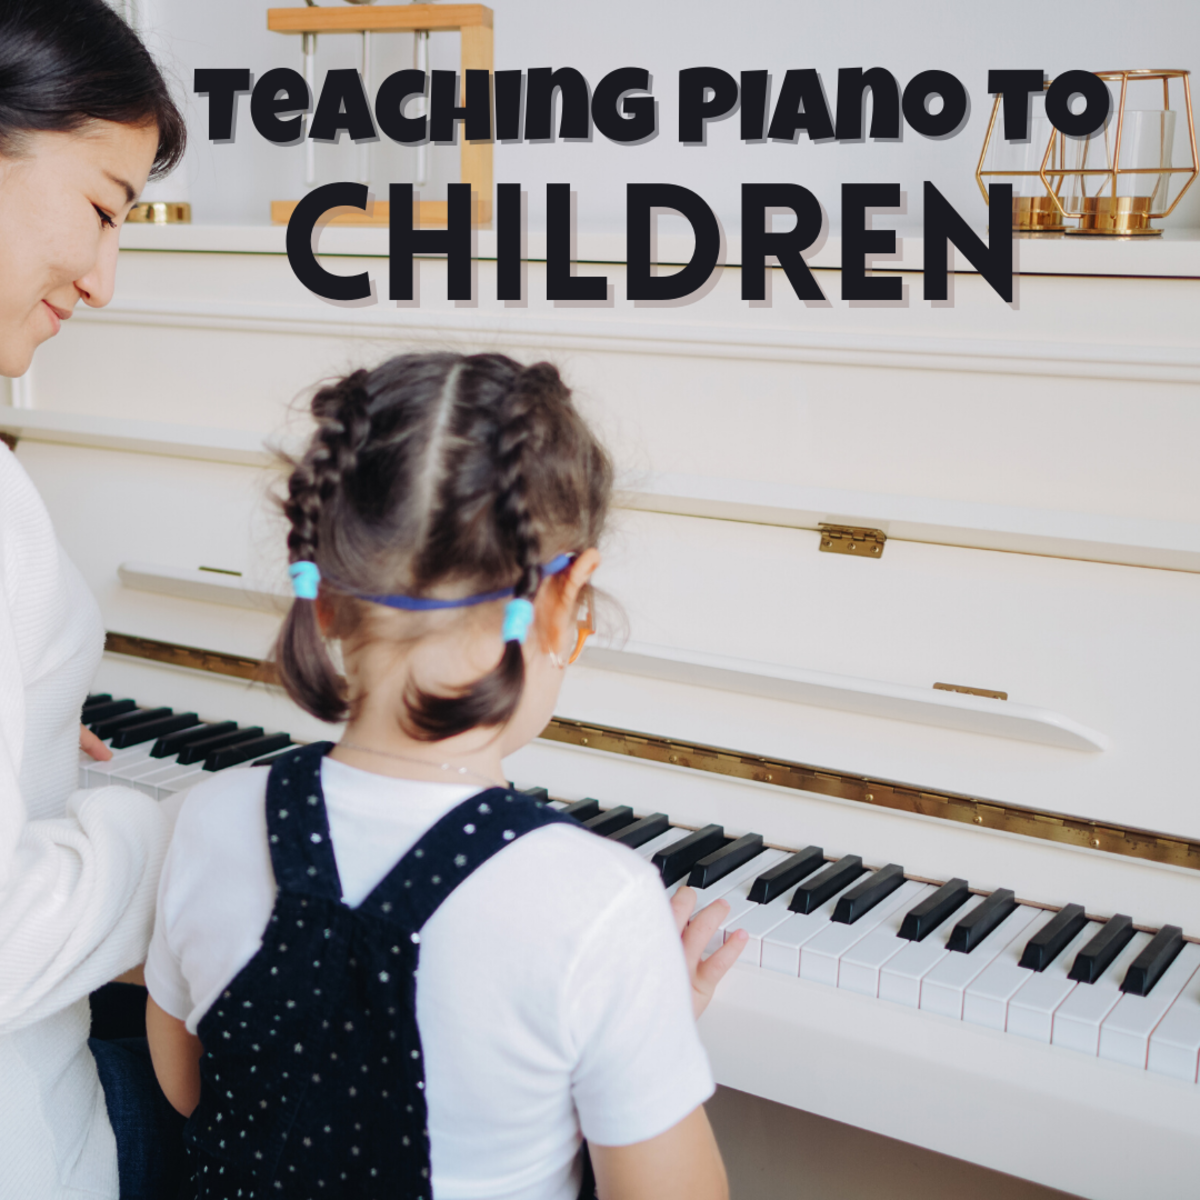 Learn how you can get your child started on their musical journey before they're ready for formal lessons.